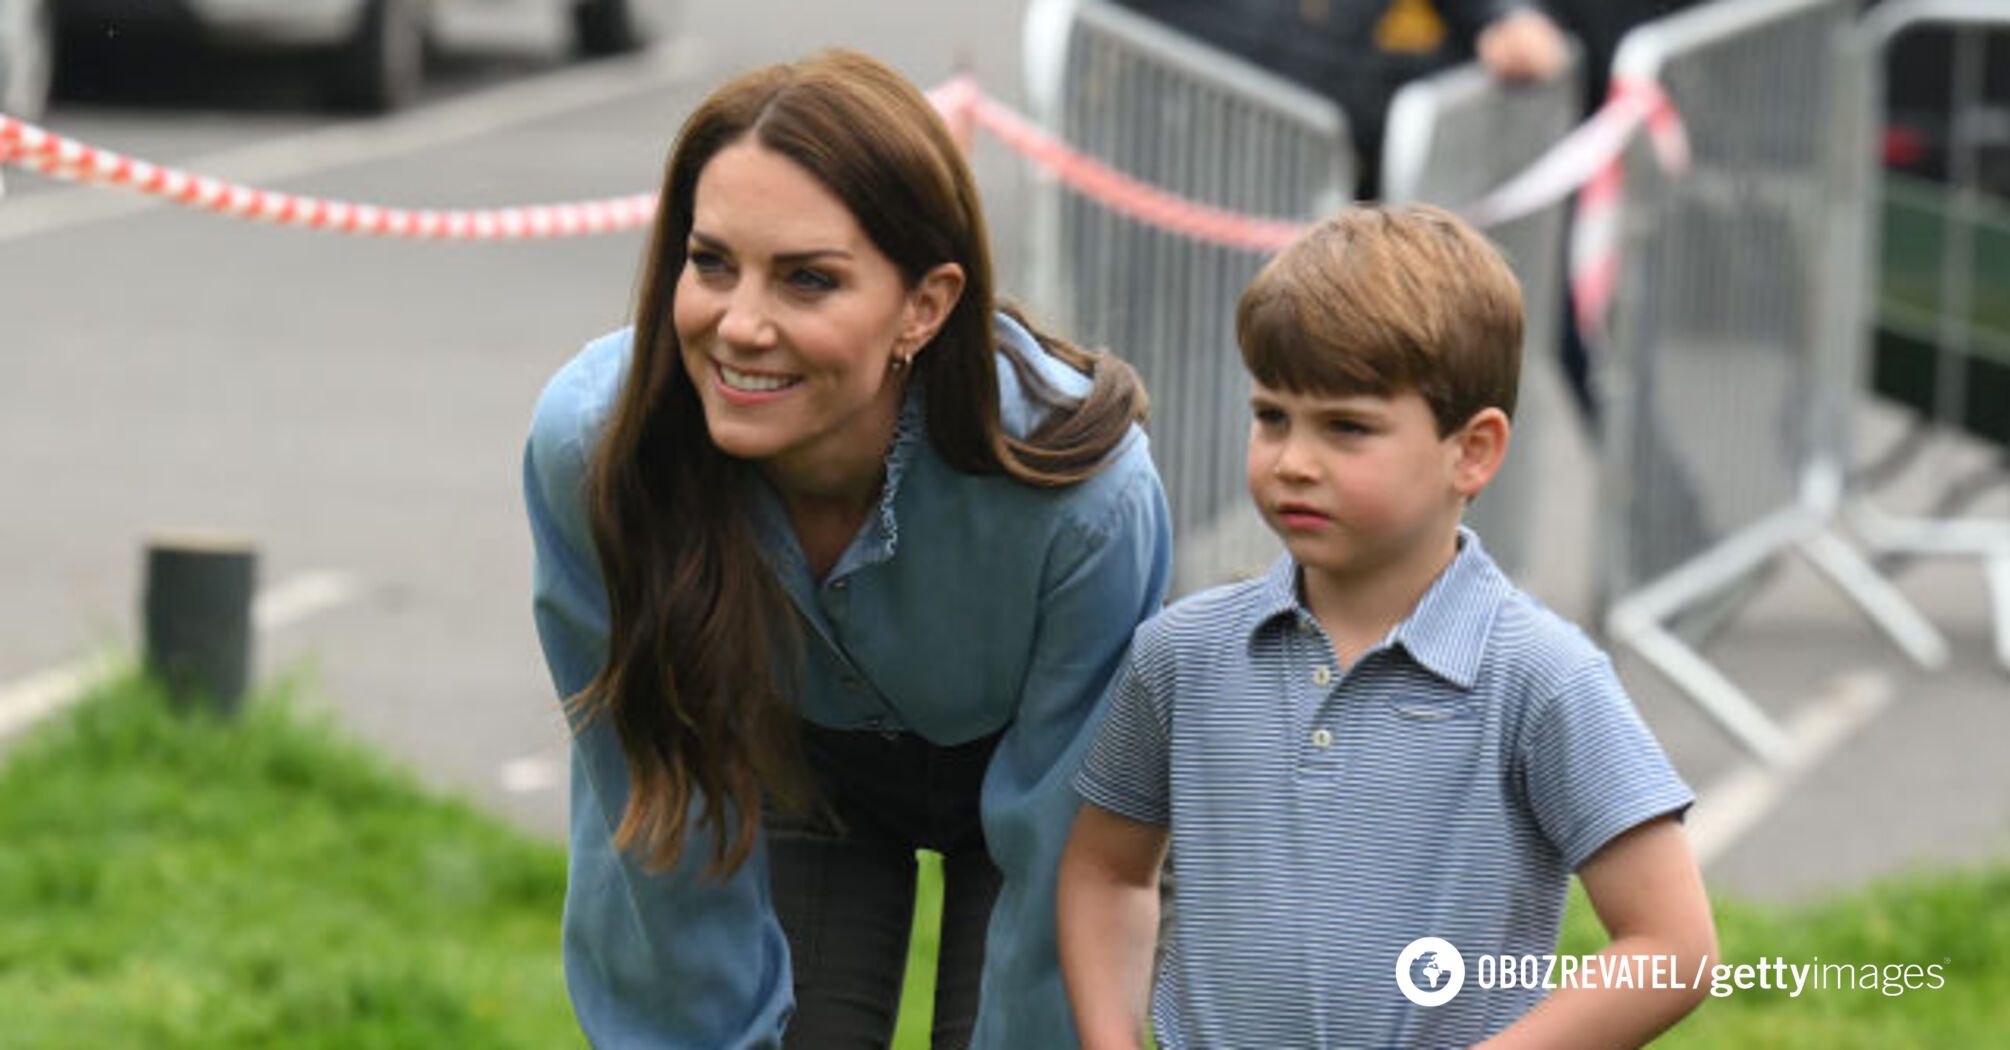 Part of Kate Middleton's plan: why Prince William's youngest son rarely seen in public